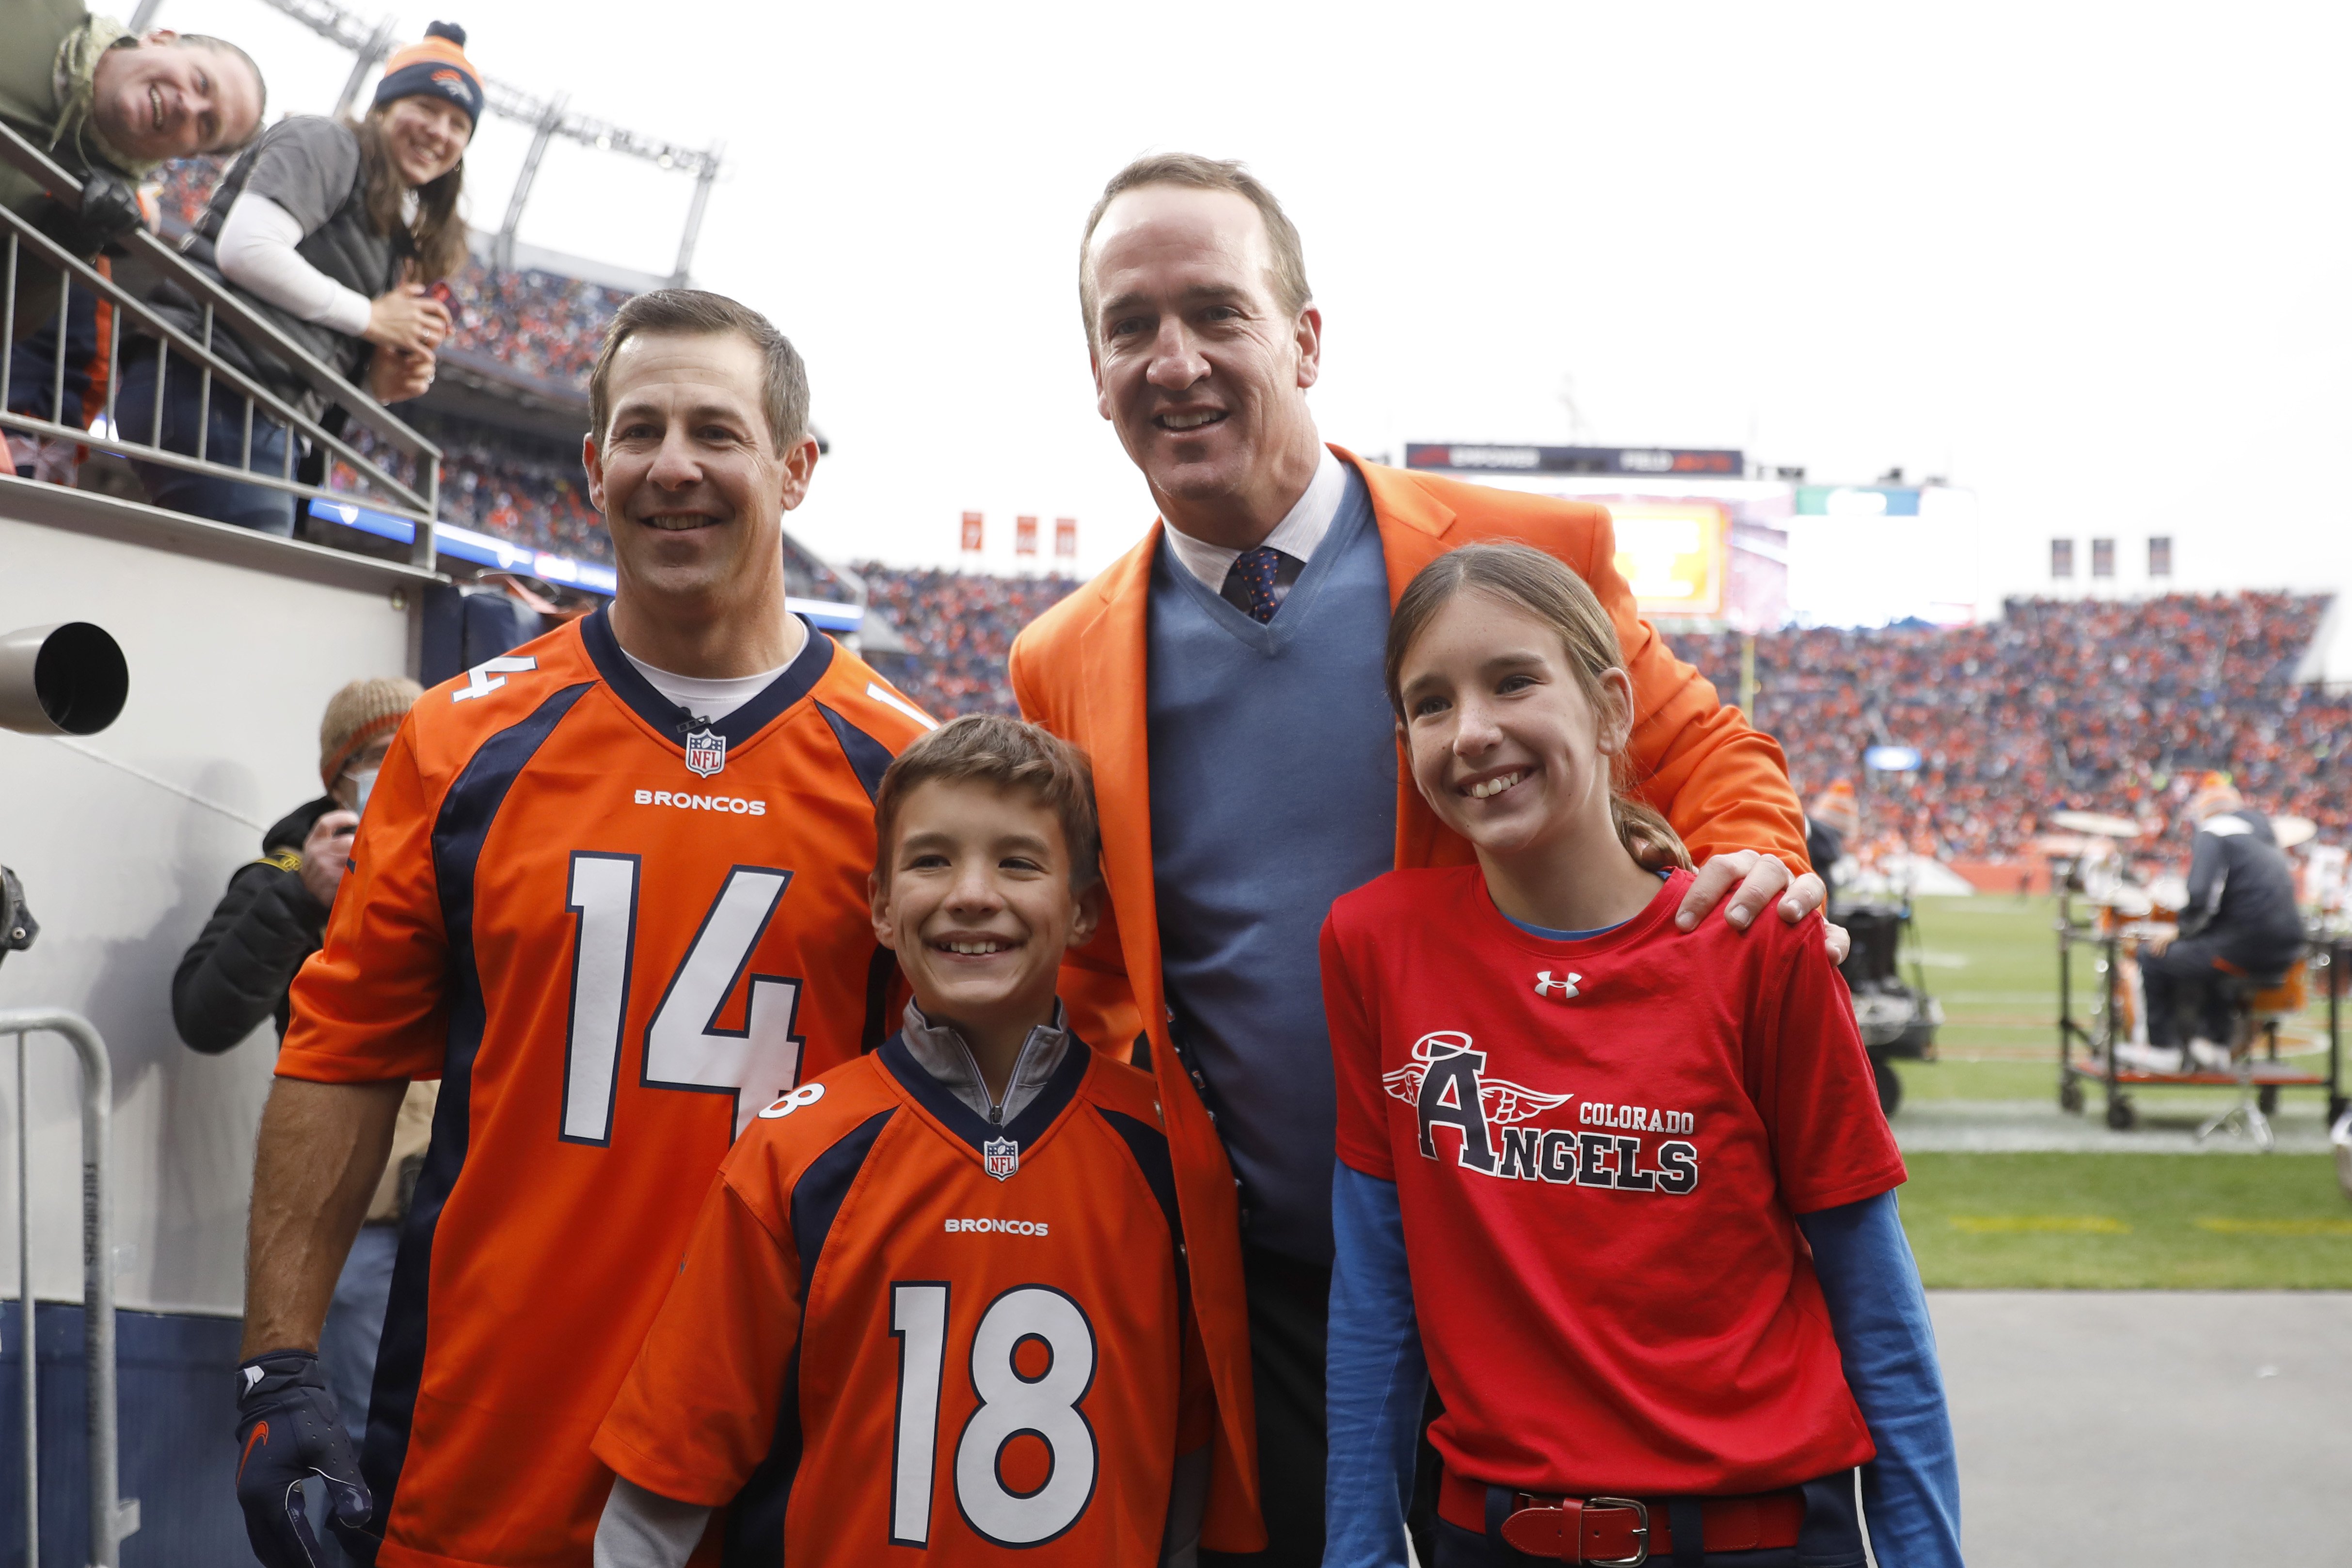 Brandon Stokely, Peyton Manning, Marshall Manning, and Mosley Manning at the Ring of Honor induction ceremony in Denver on October 31, 2021 | Source: Getty Images